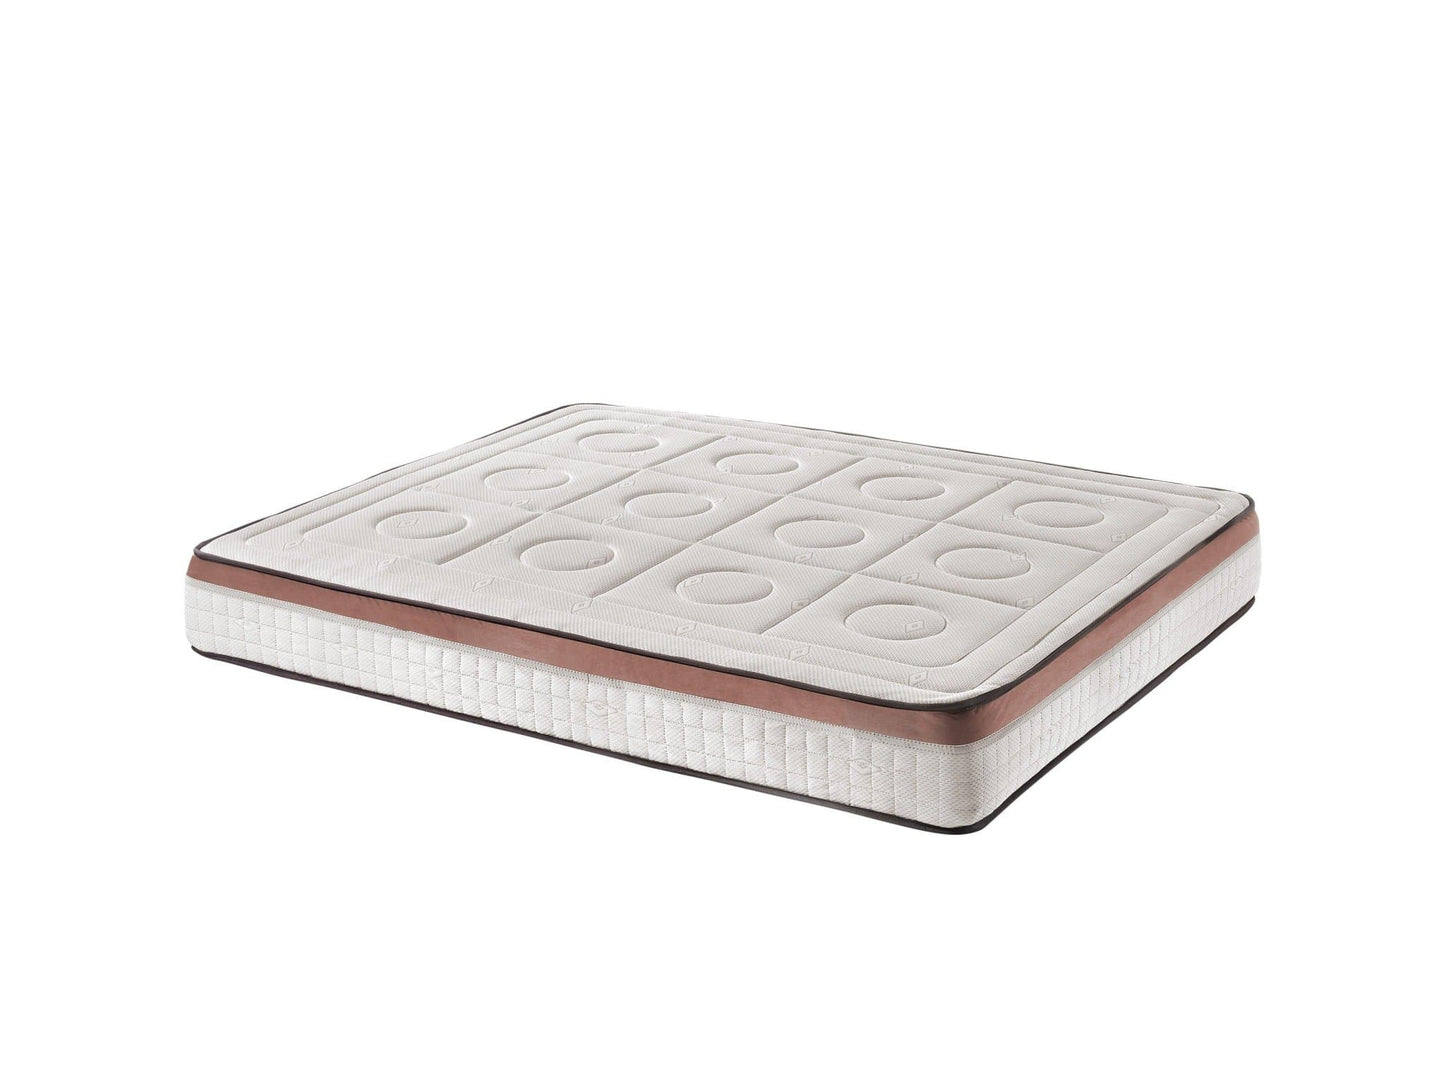 Pack Basic Oak Wood Canapé and Deluxe Tuscany Mattress  | 21 cm